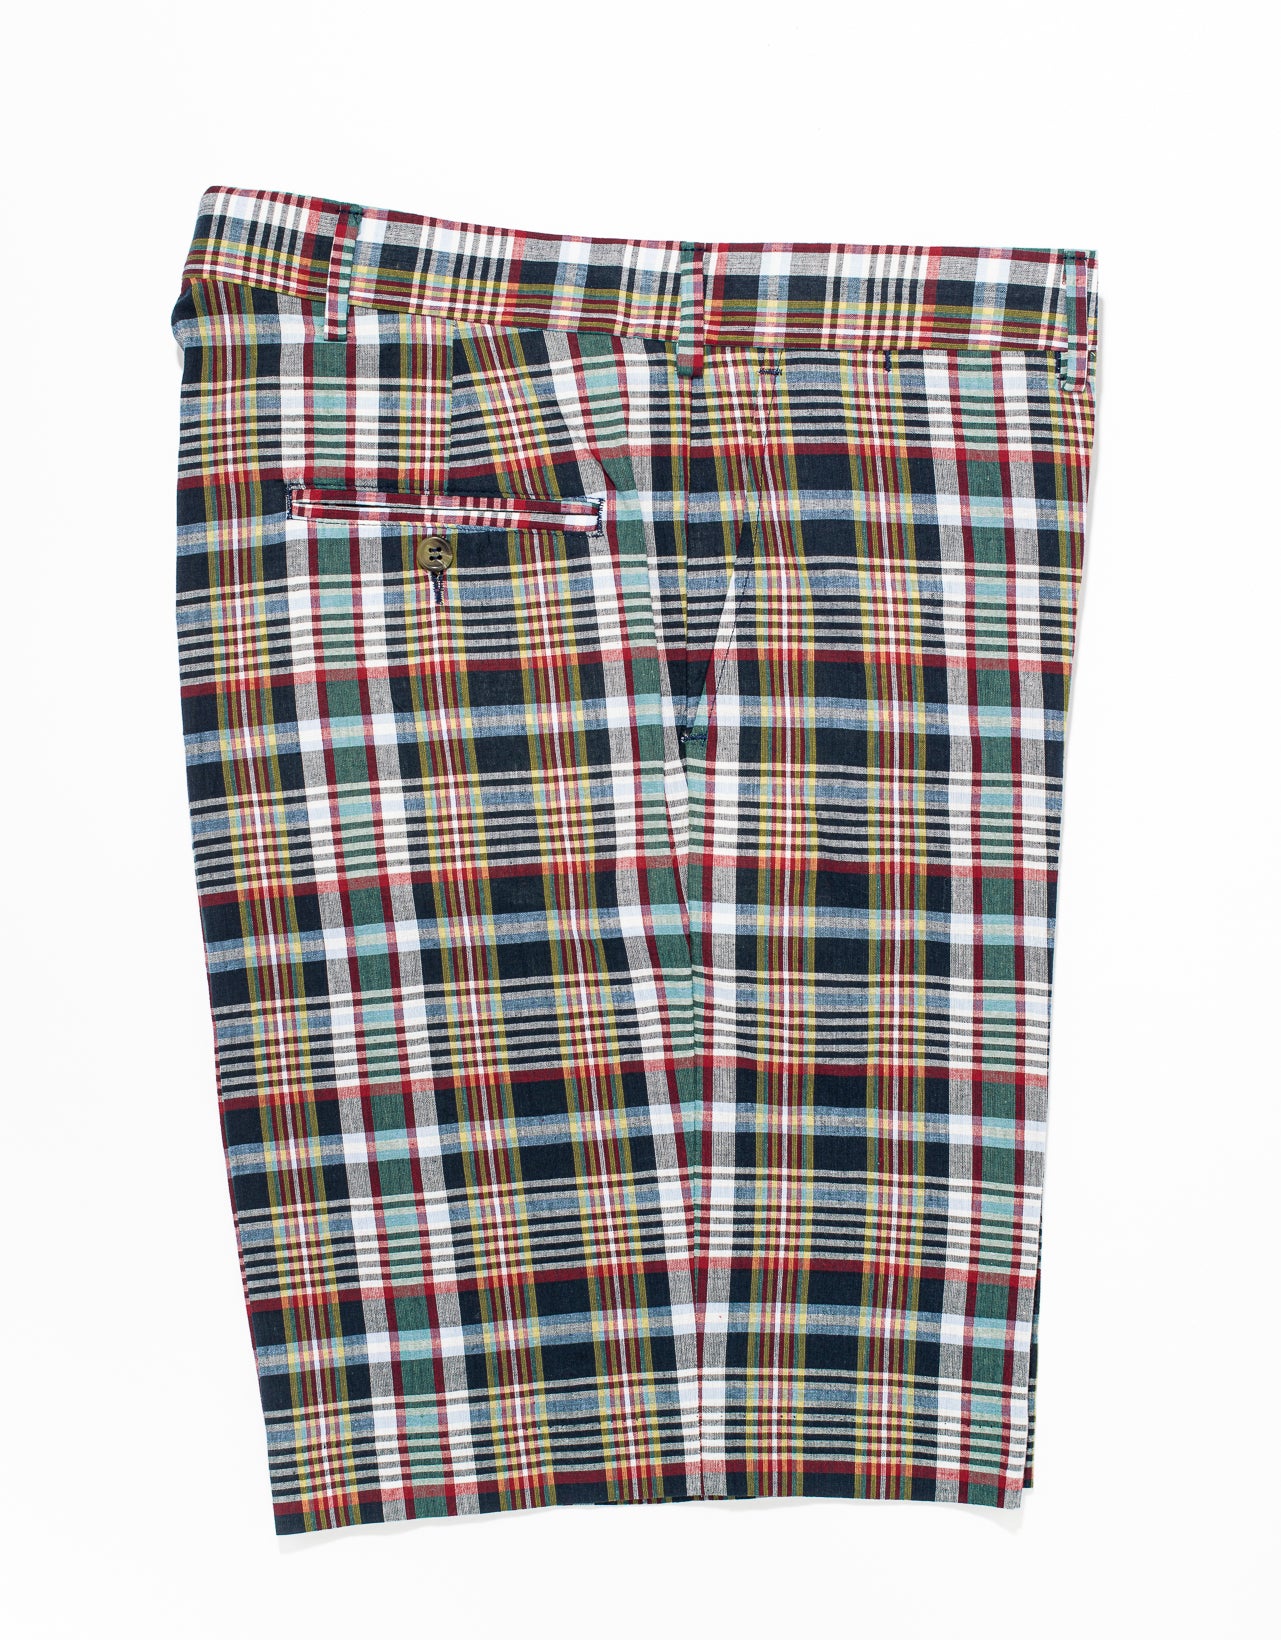 COTTON  MADRAS SHORTS - NAVY/WHITE/GREEN/YELLOW/RED